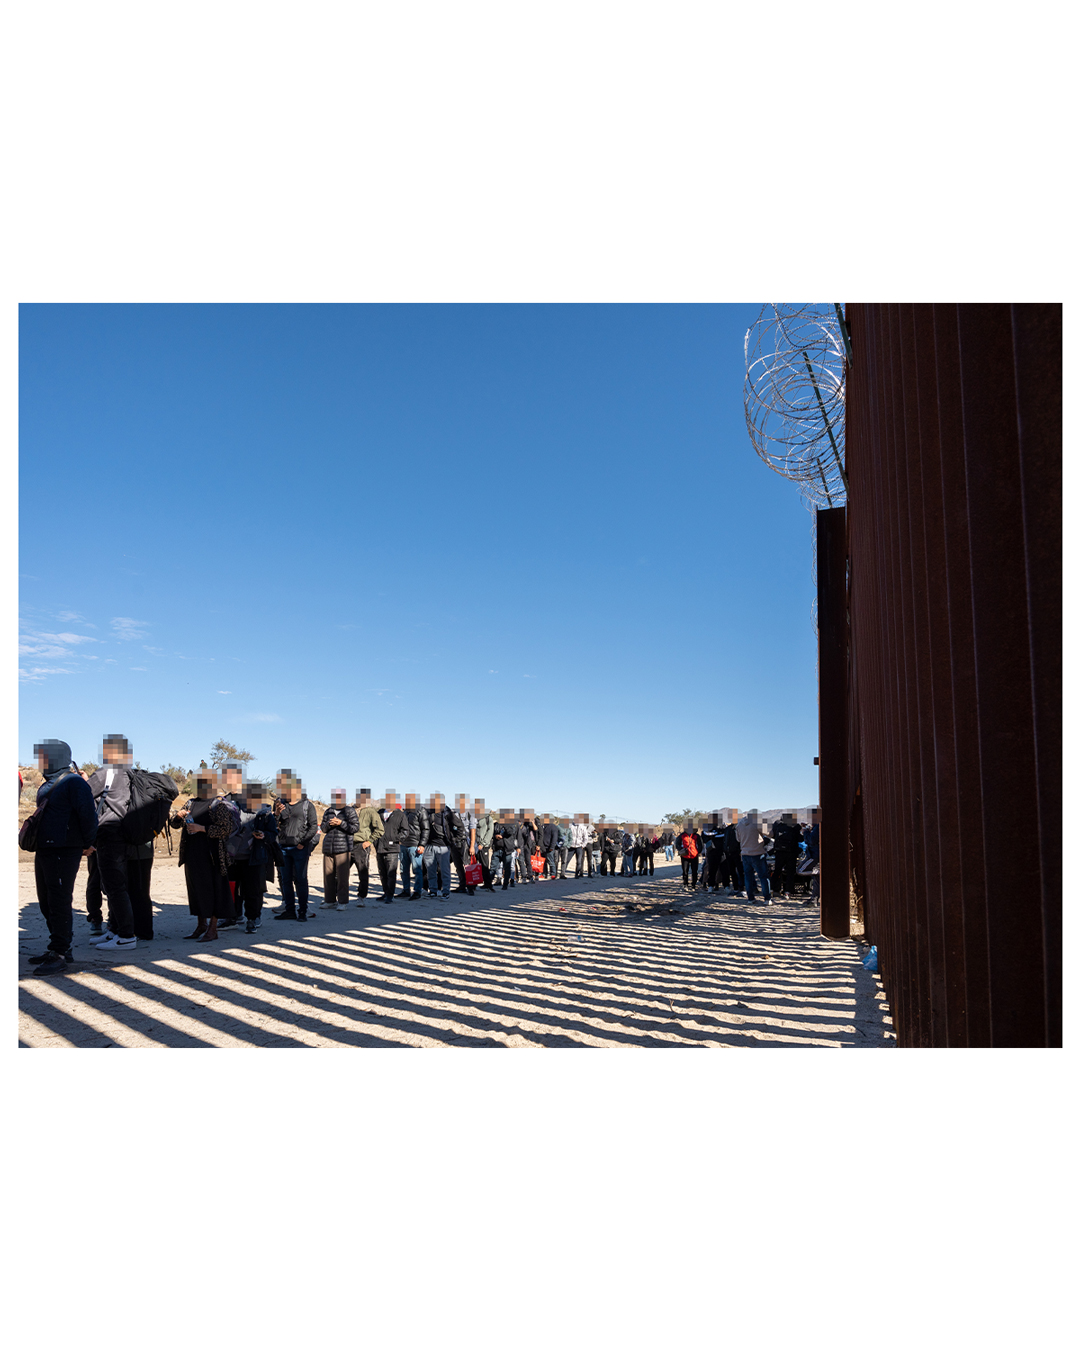 The view from against the border wall. The wall is large slats, through which light shines through, creating a series of light and shadow bars on the ground. A line of migrants stretches as far as the eye can see; a few carry backpacks, most have no belongings in their hands.